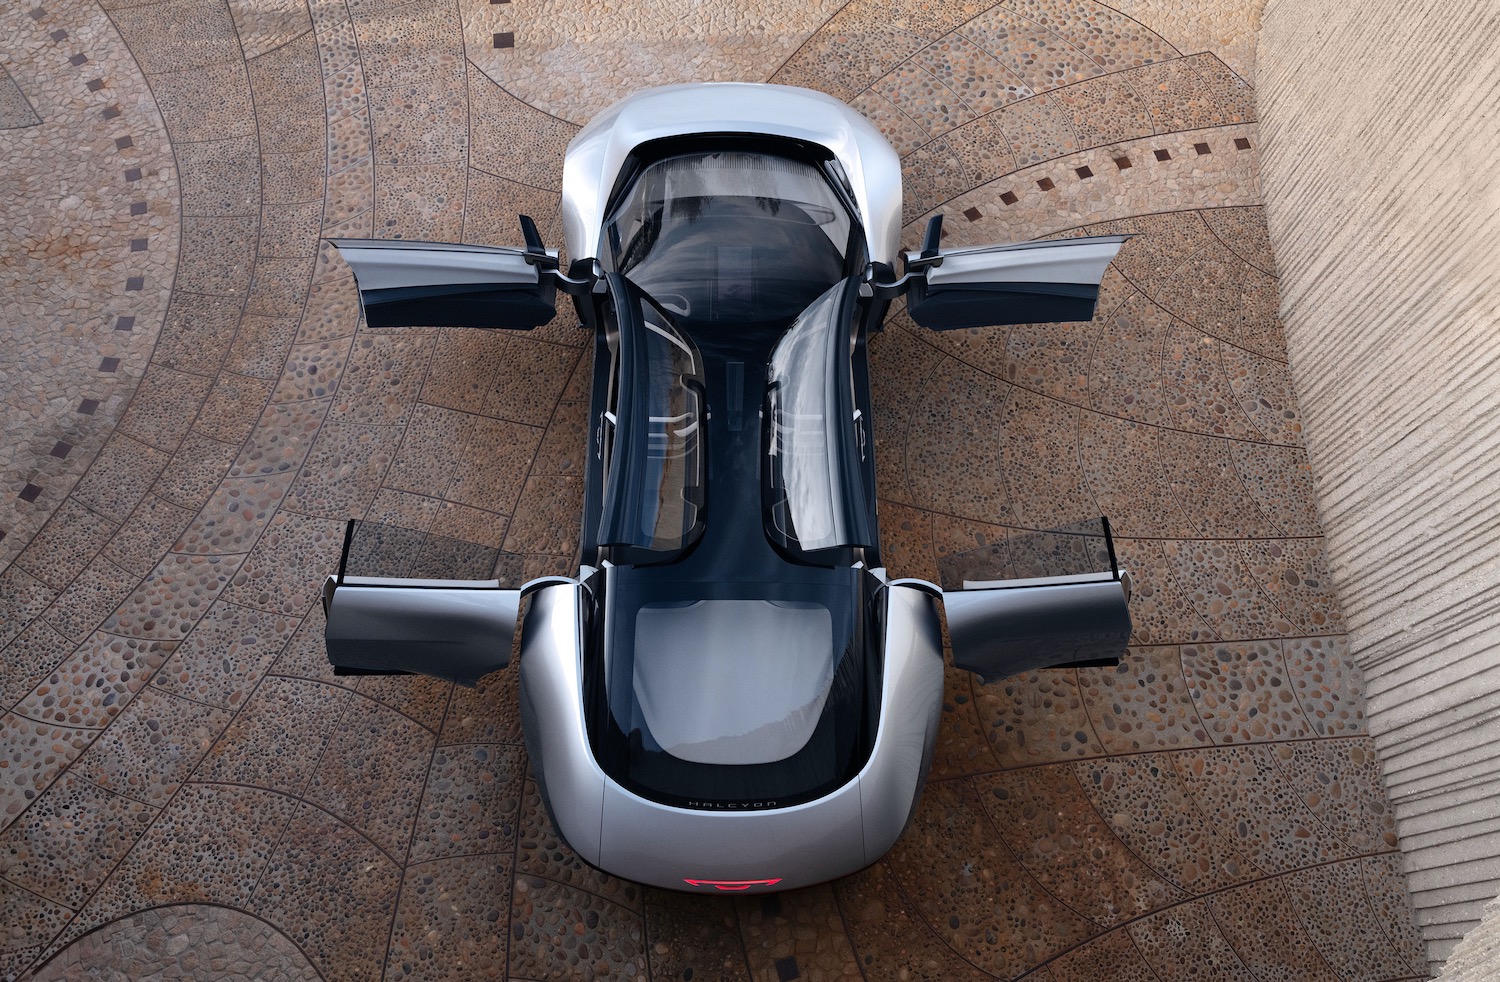 Overhead view of the Chrysler Halcyon concept with its doors open.